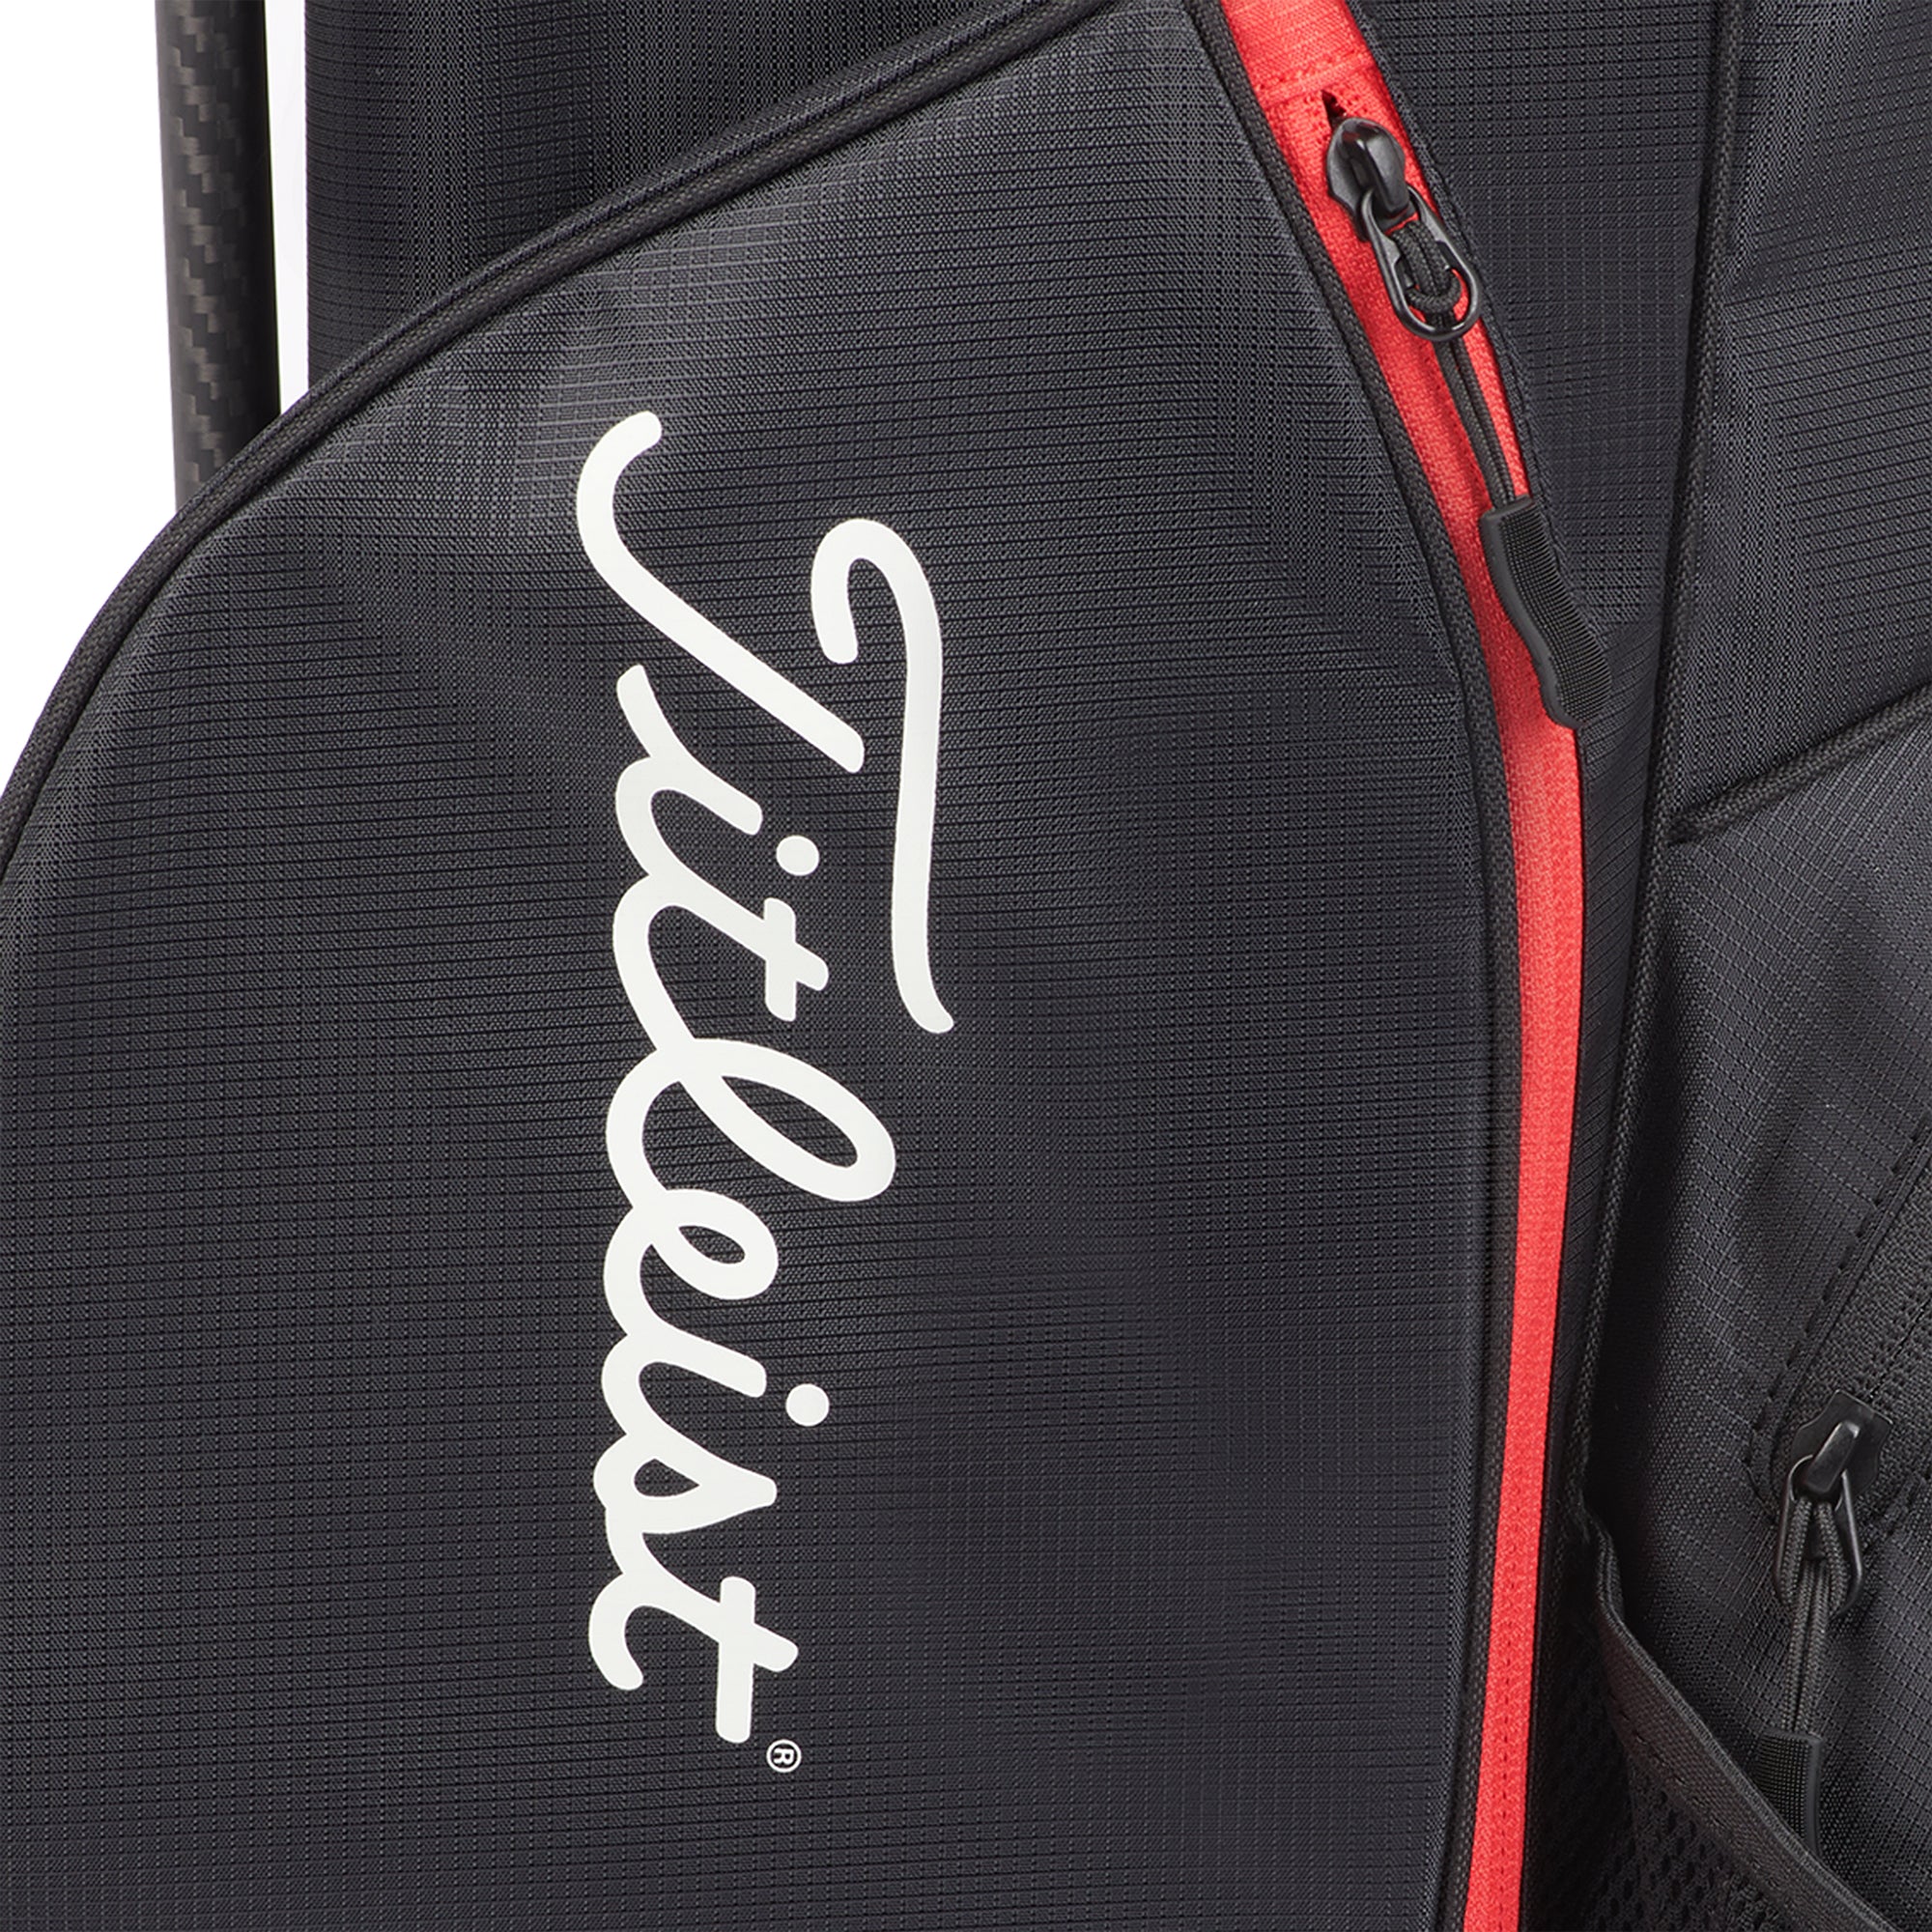 titleist-players-4-carbon-stand-bag-tb22sx5-006-black-black-red